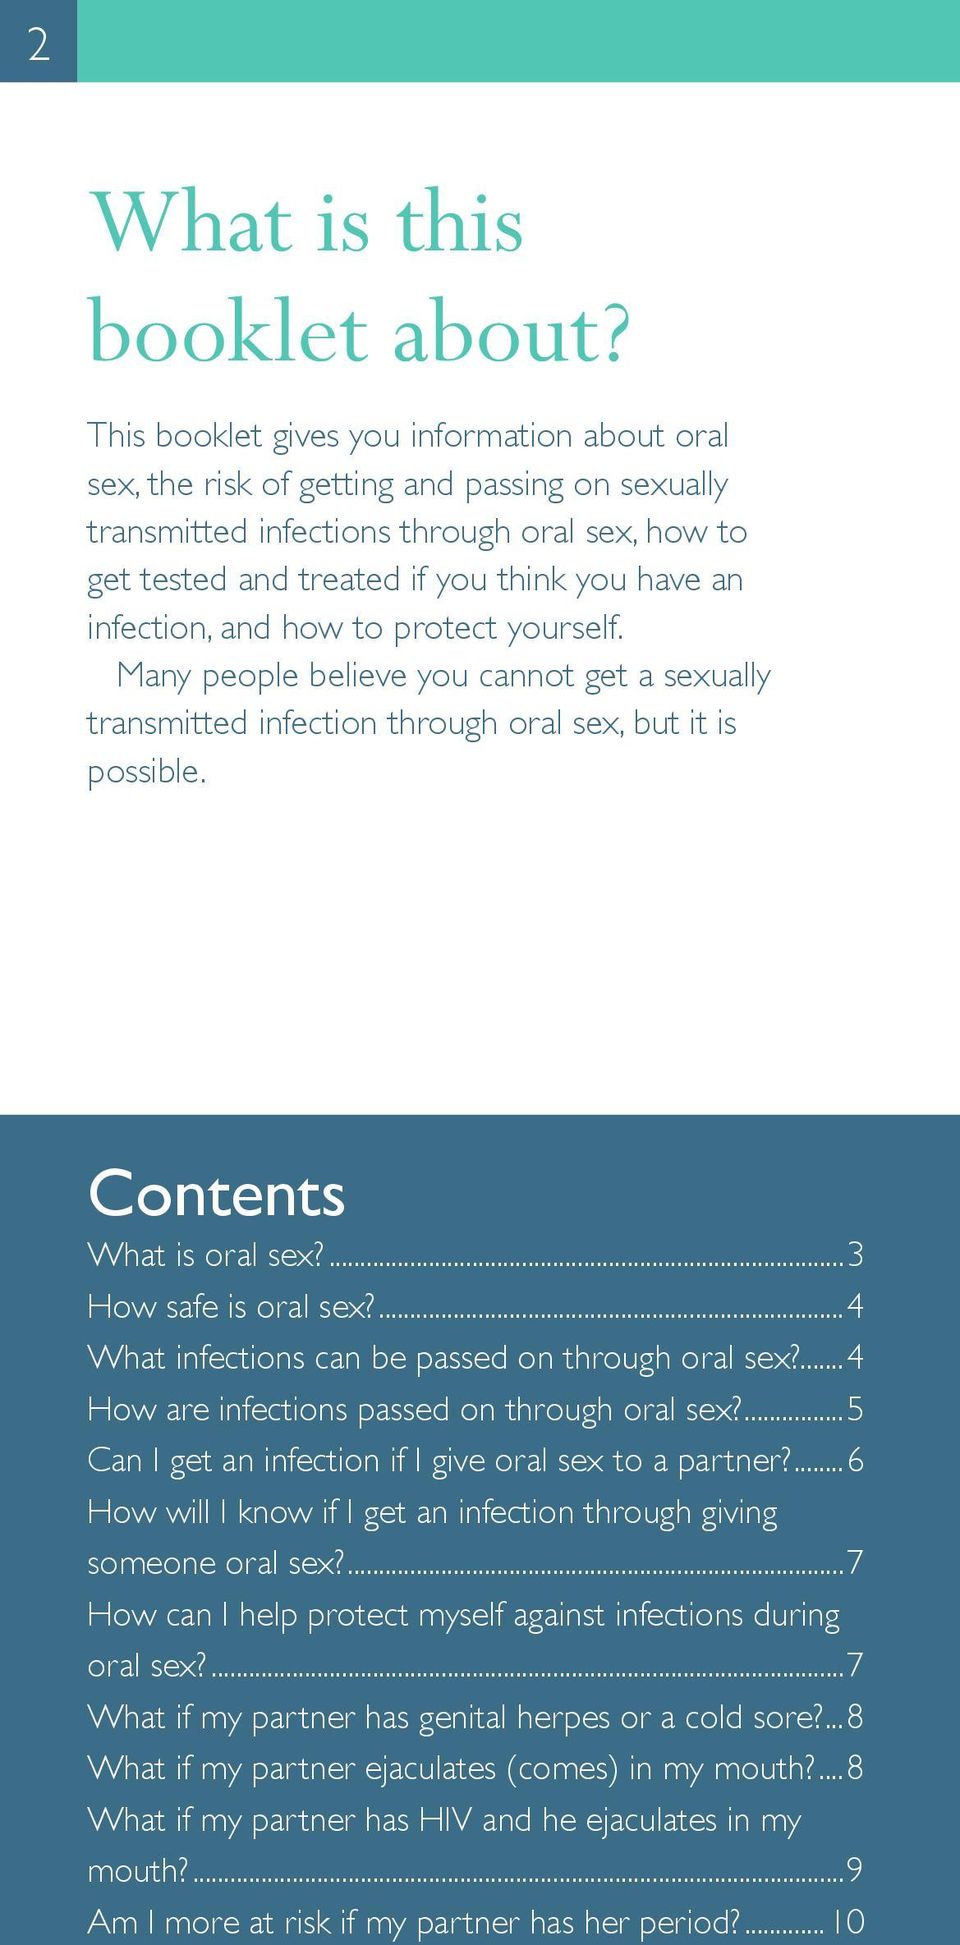 infection, and how to protect yourself. Many people believe you cannot get a sexually transmitted infection through oral sex, but it is possible. Contents What is oral sex?...3 How safe is oral sex?